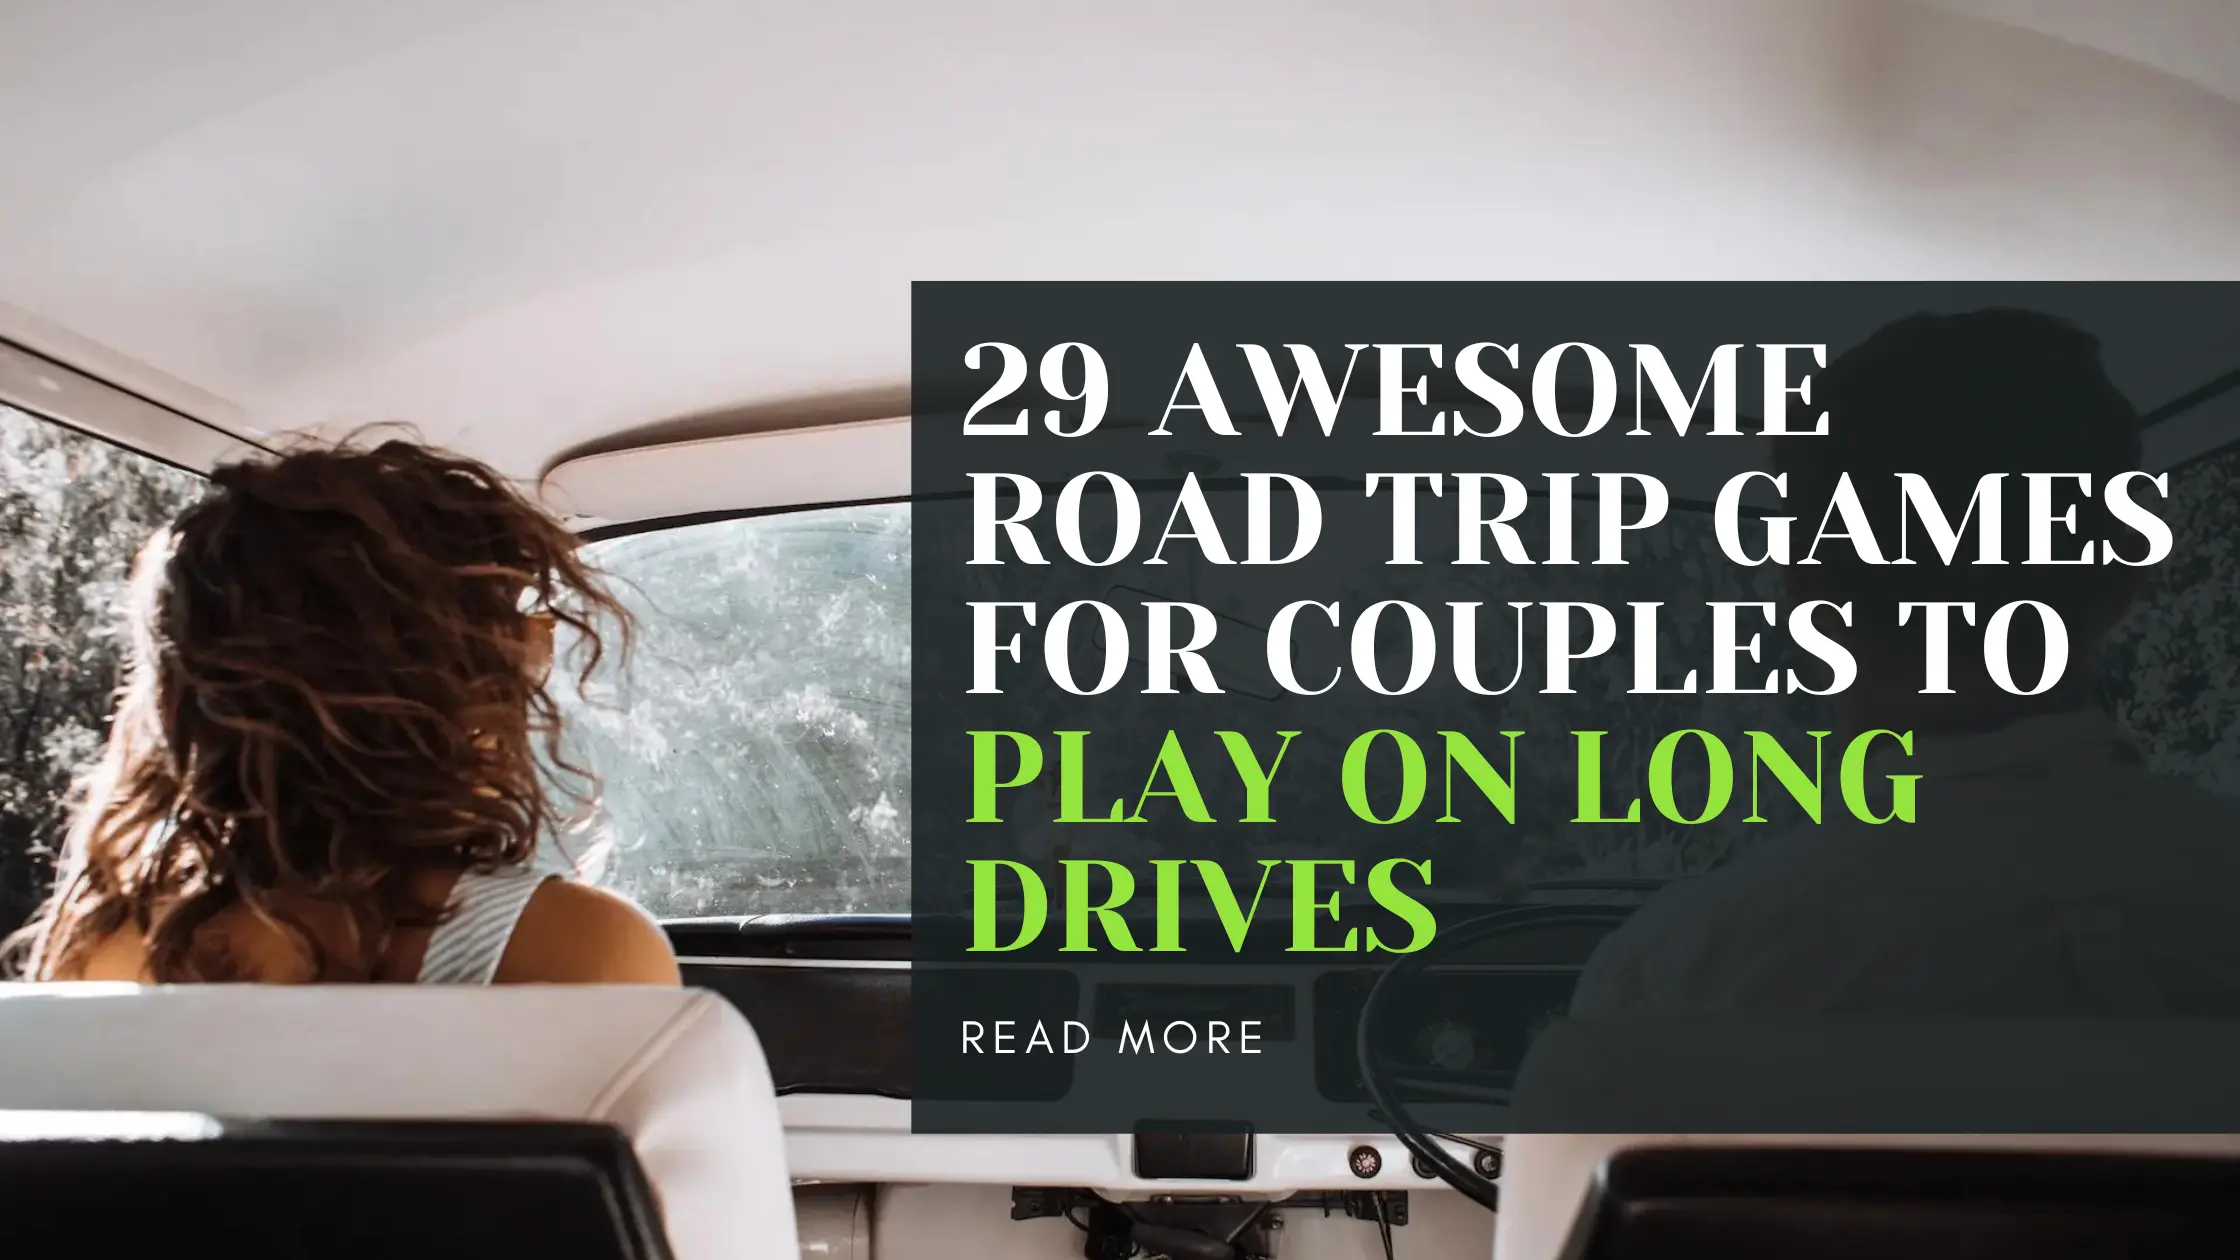 29 Awesome Road Trip Games for Couples to Play on Long Drives